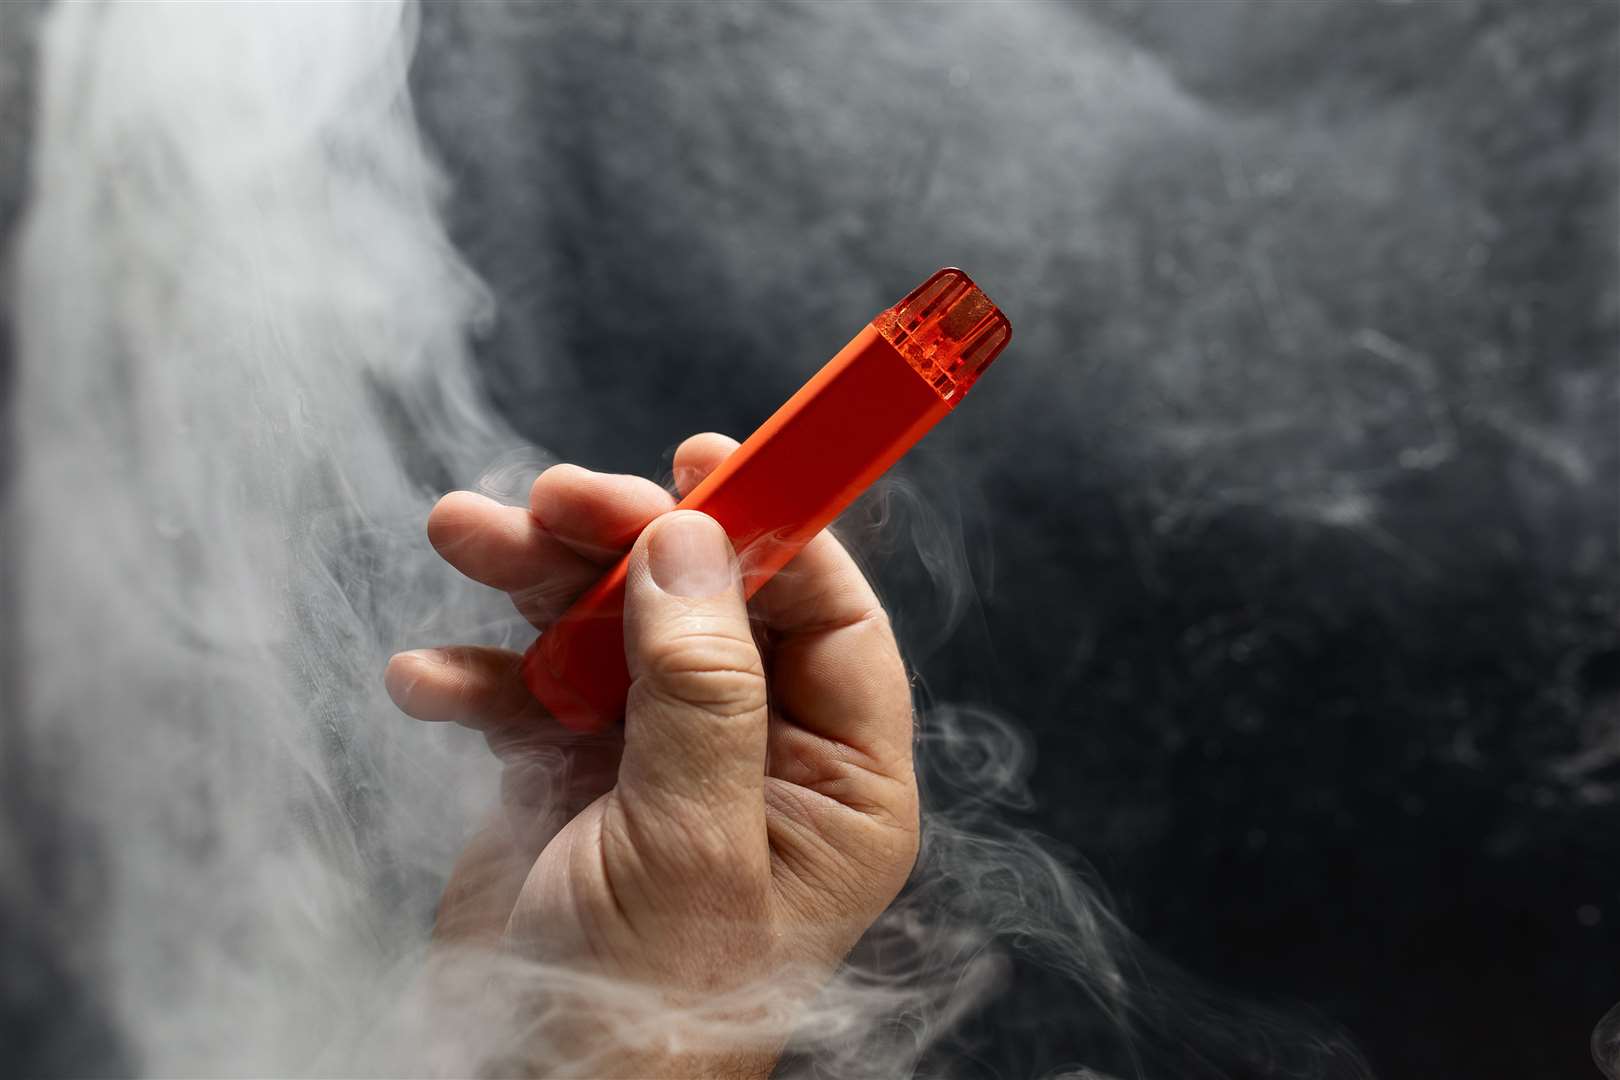 Aberdeenshire Council's Trading Standards is clamping down on retailers selling tobacco or nicotine vape products to anyone under the age of 18.